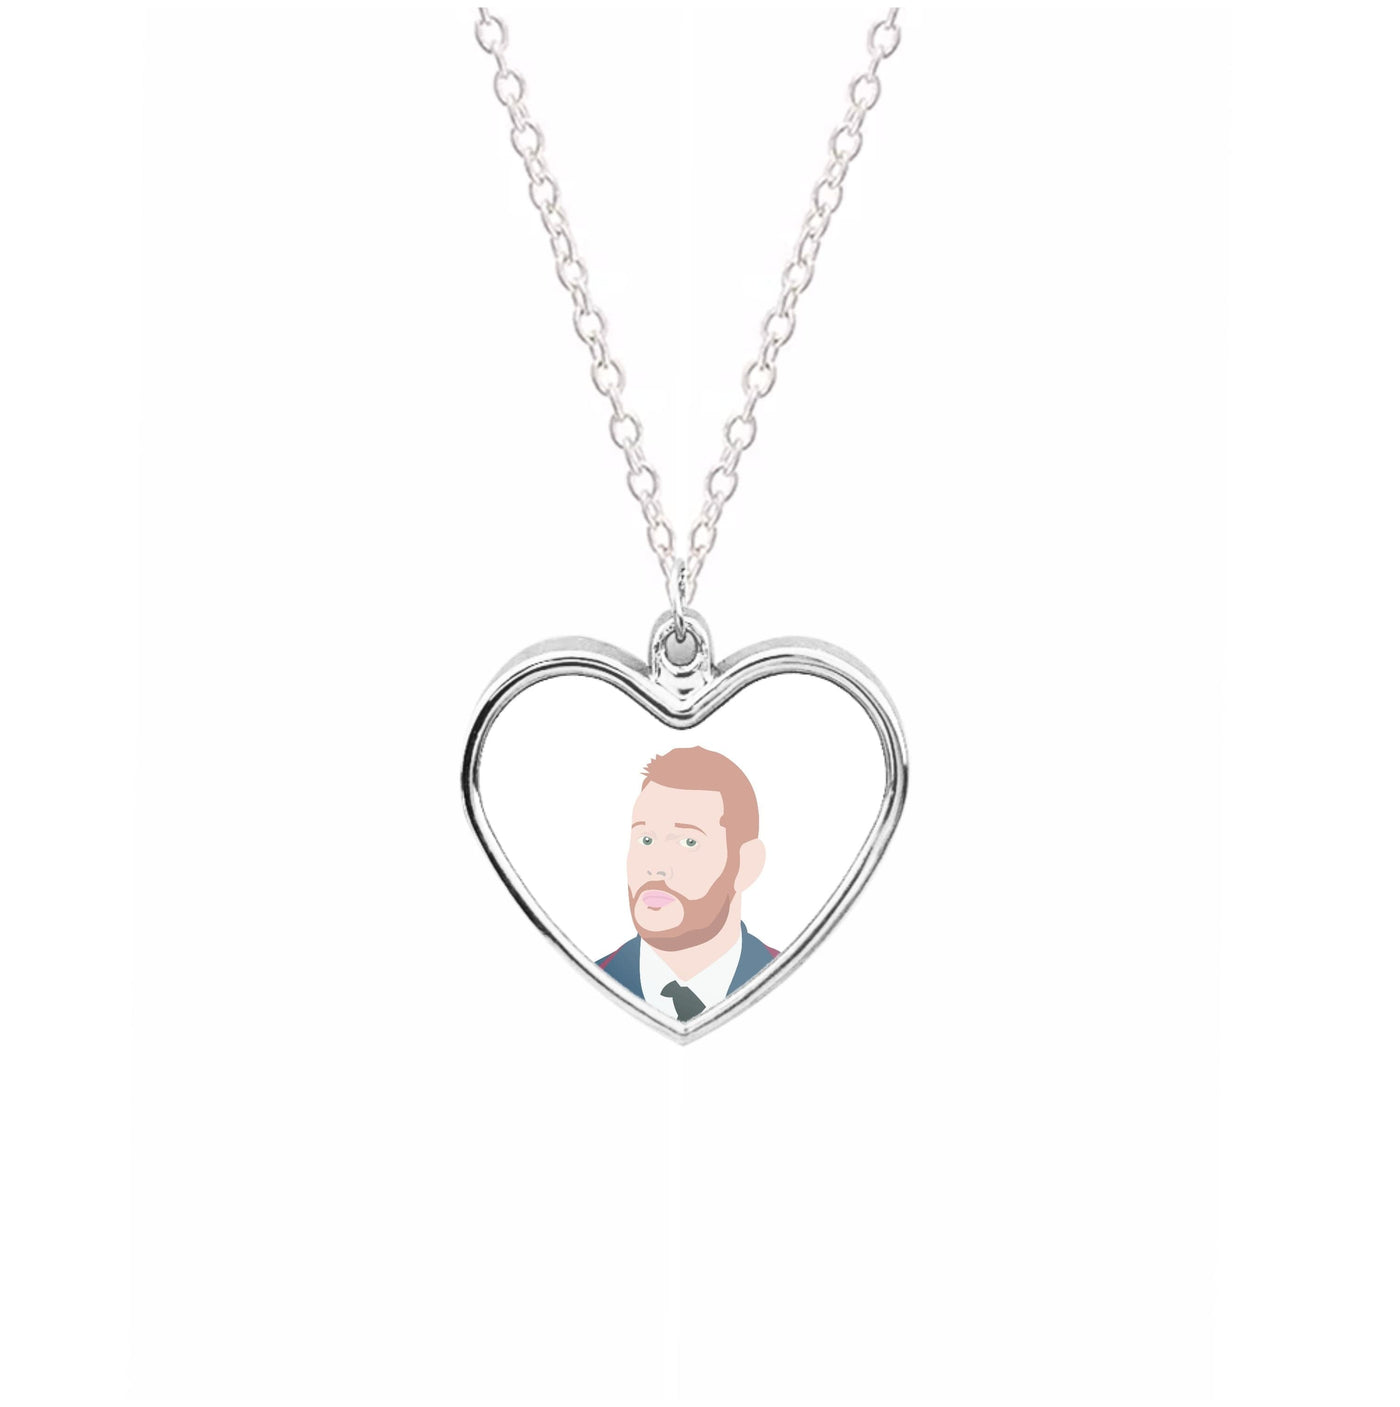 Luther - Umbrella Academy Necklace